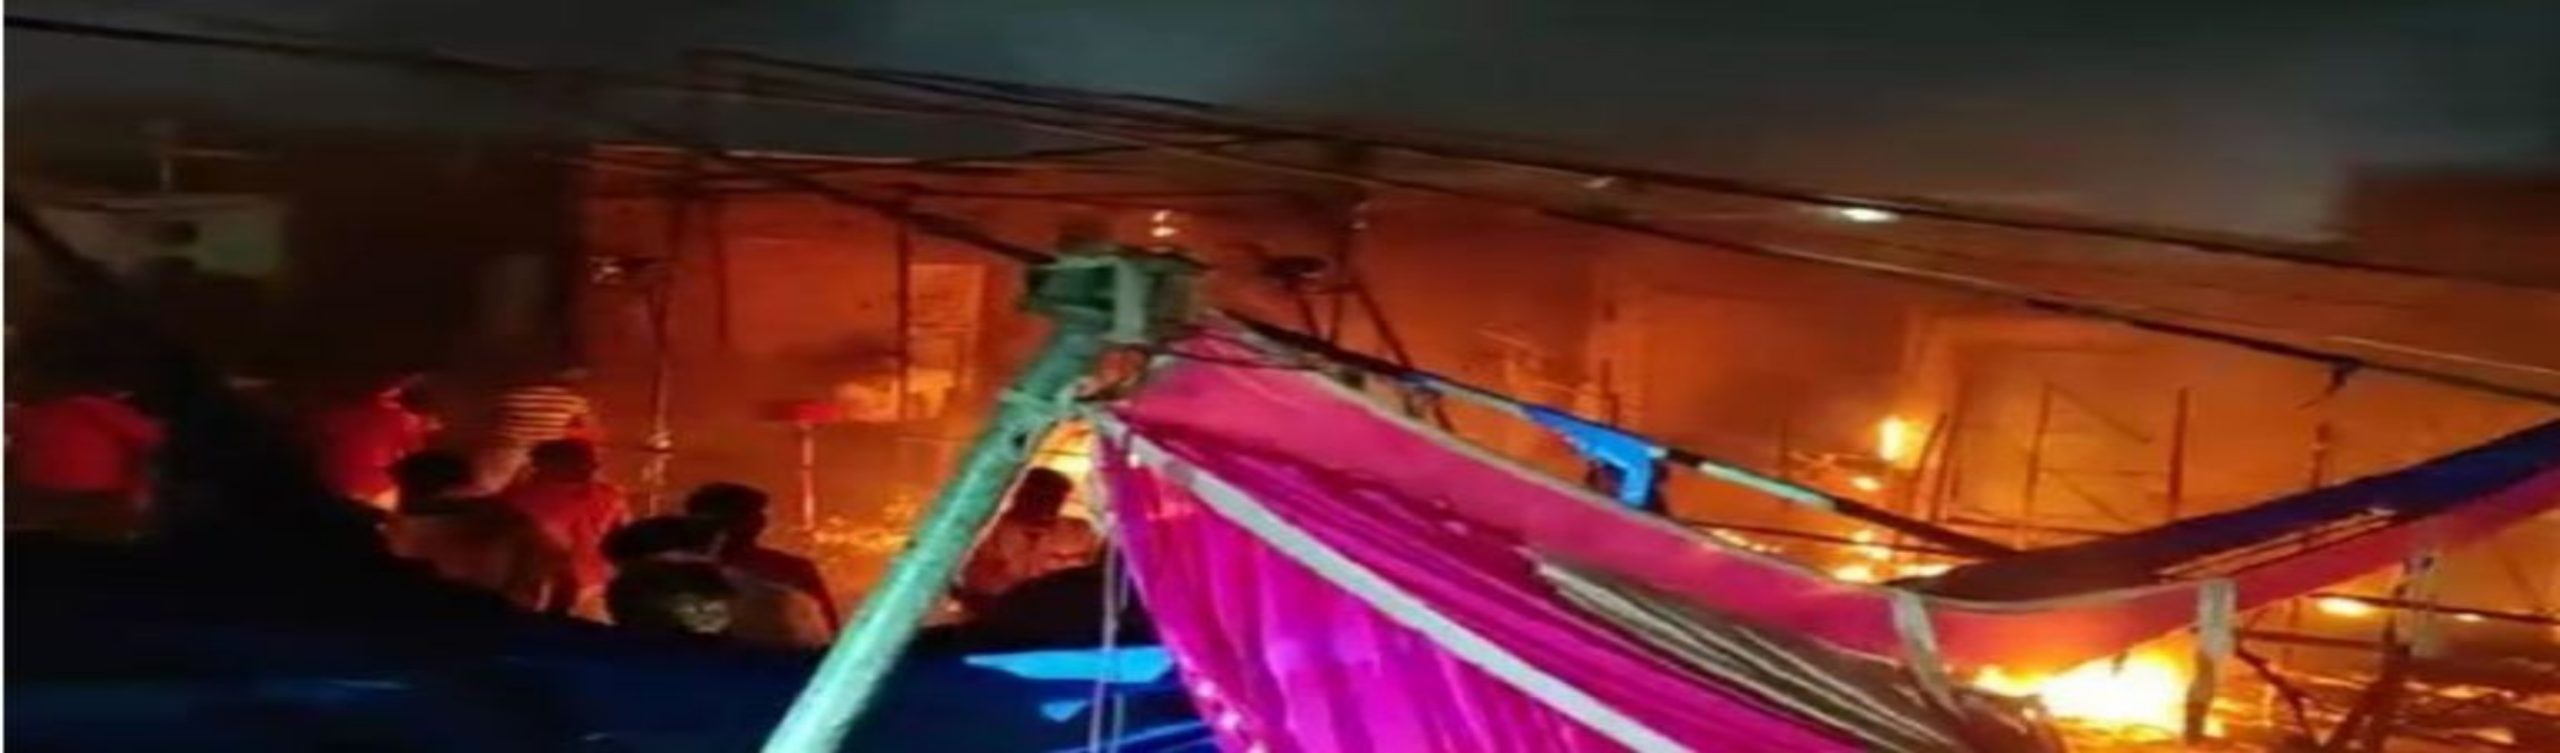 Pandal catches fire